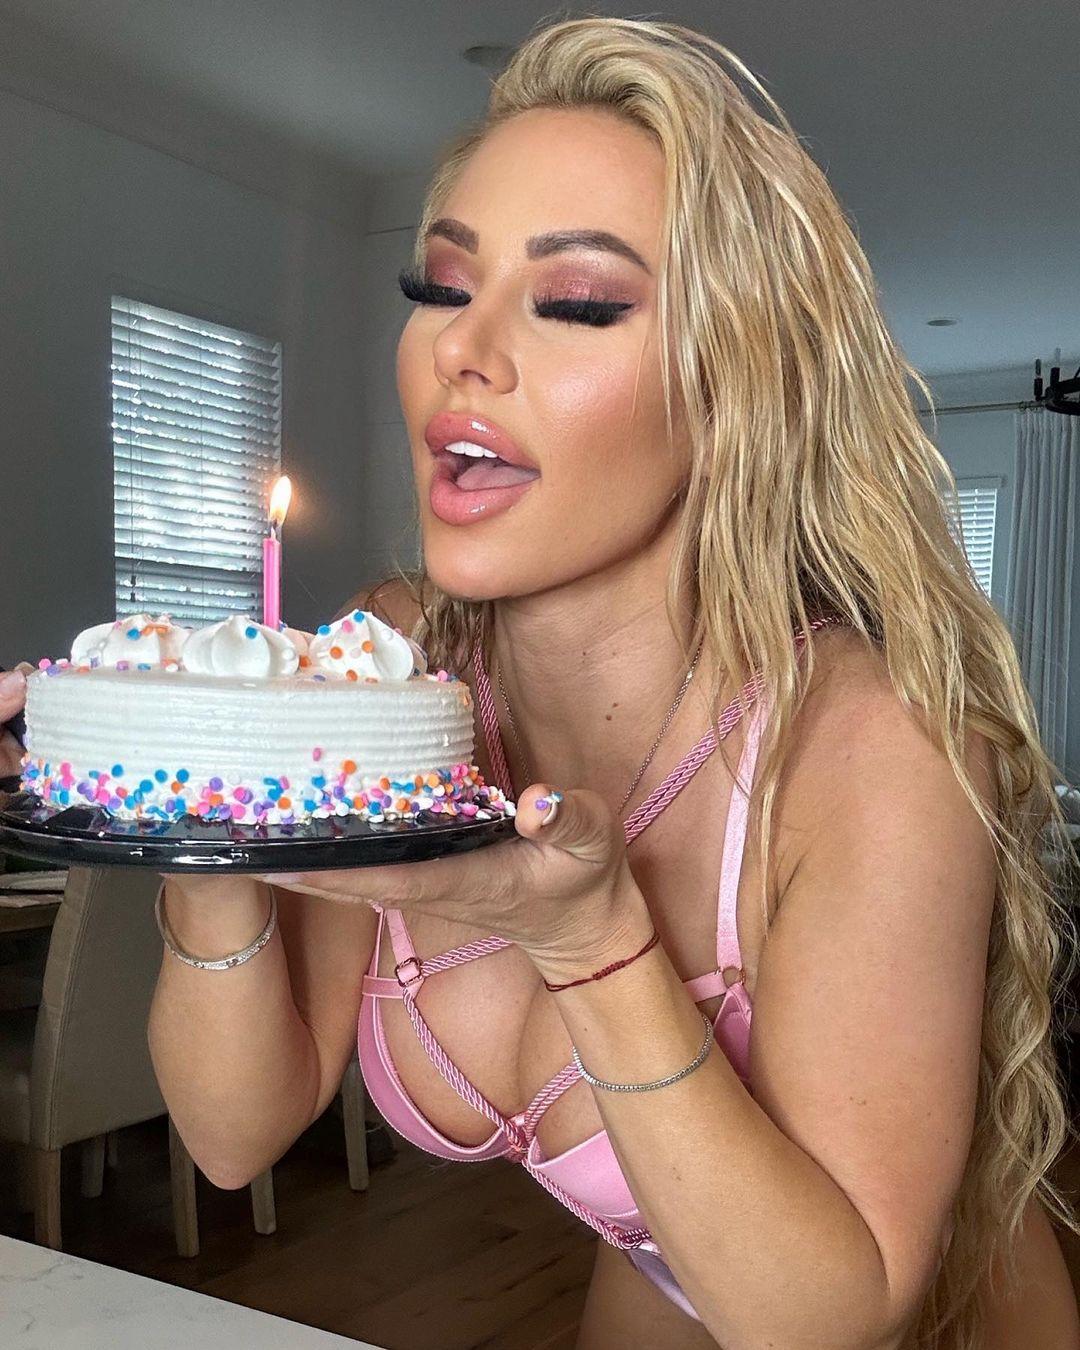 Army Veteran Kindly Myers In Pink Lingerie Teases Her Birthday Cake